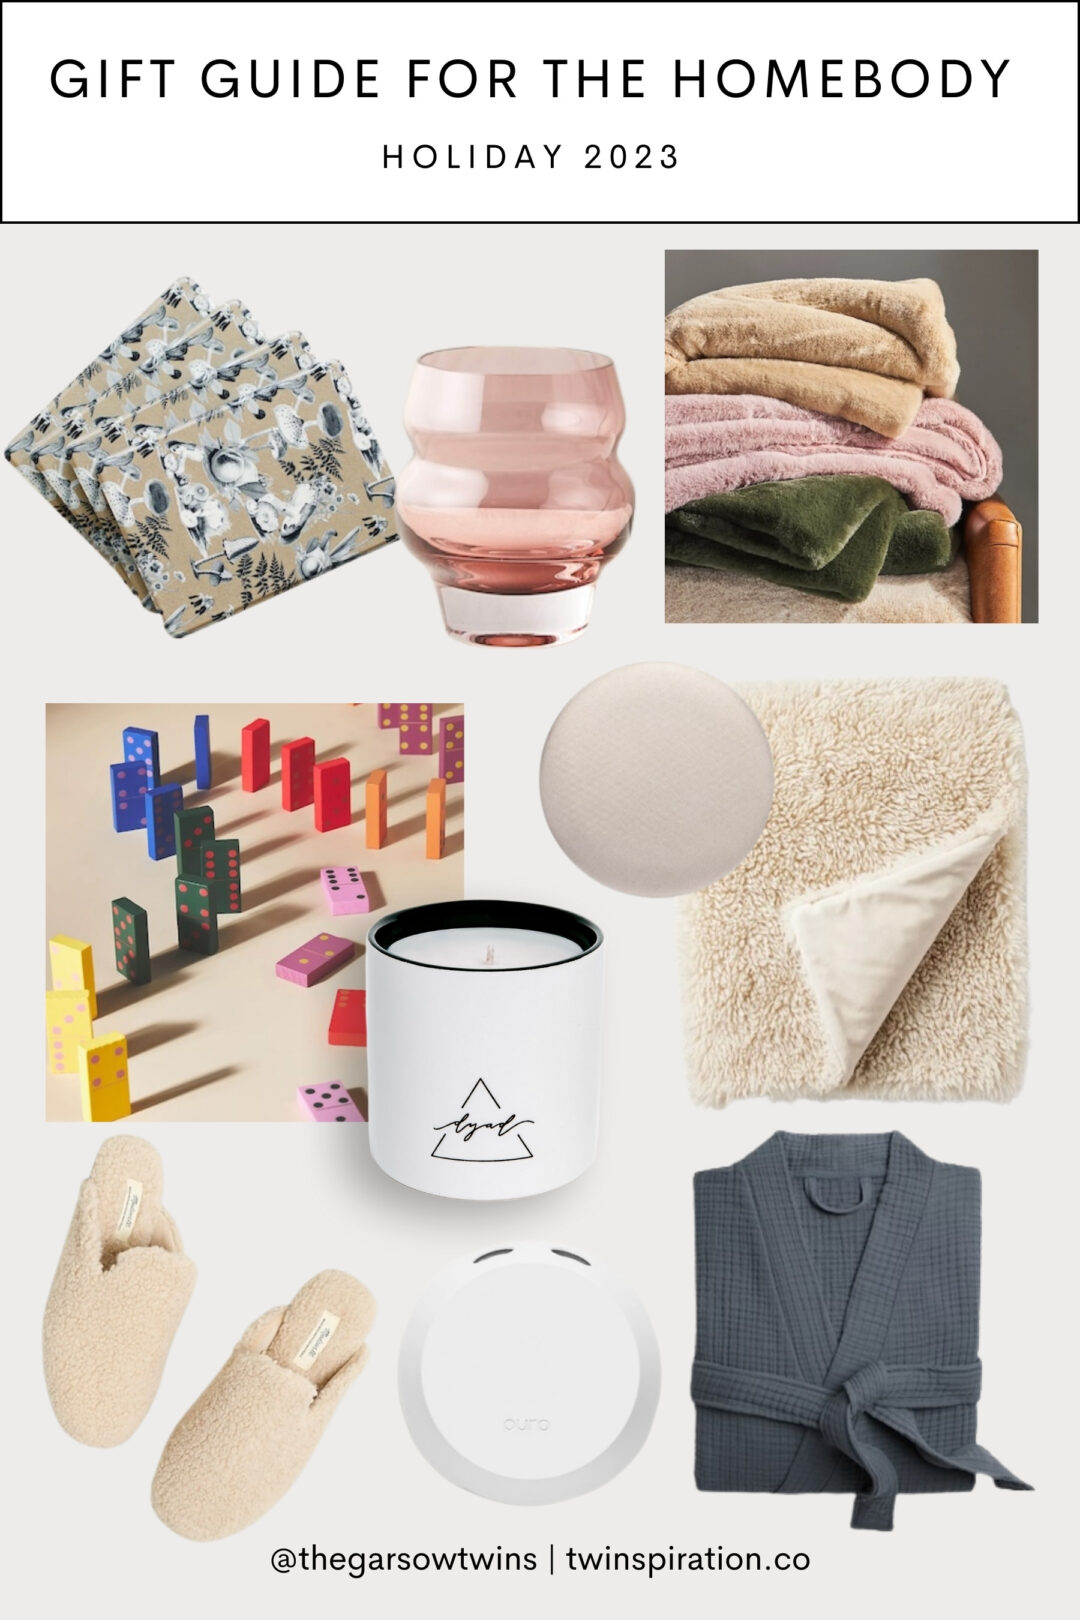 Gift Guide For The Homebody | Twinspiration